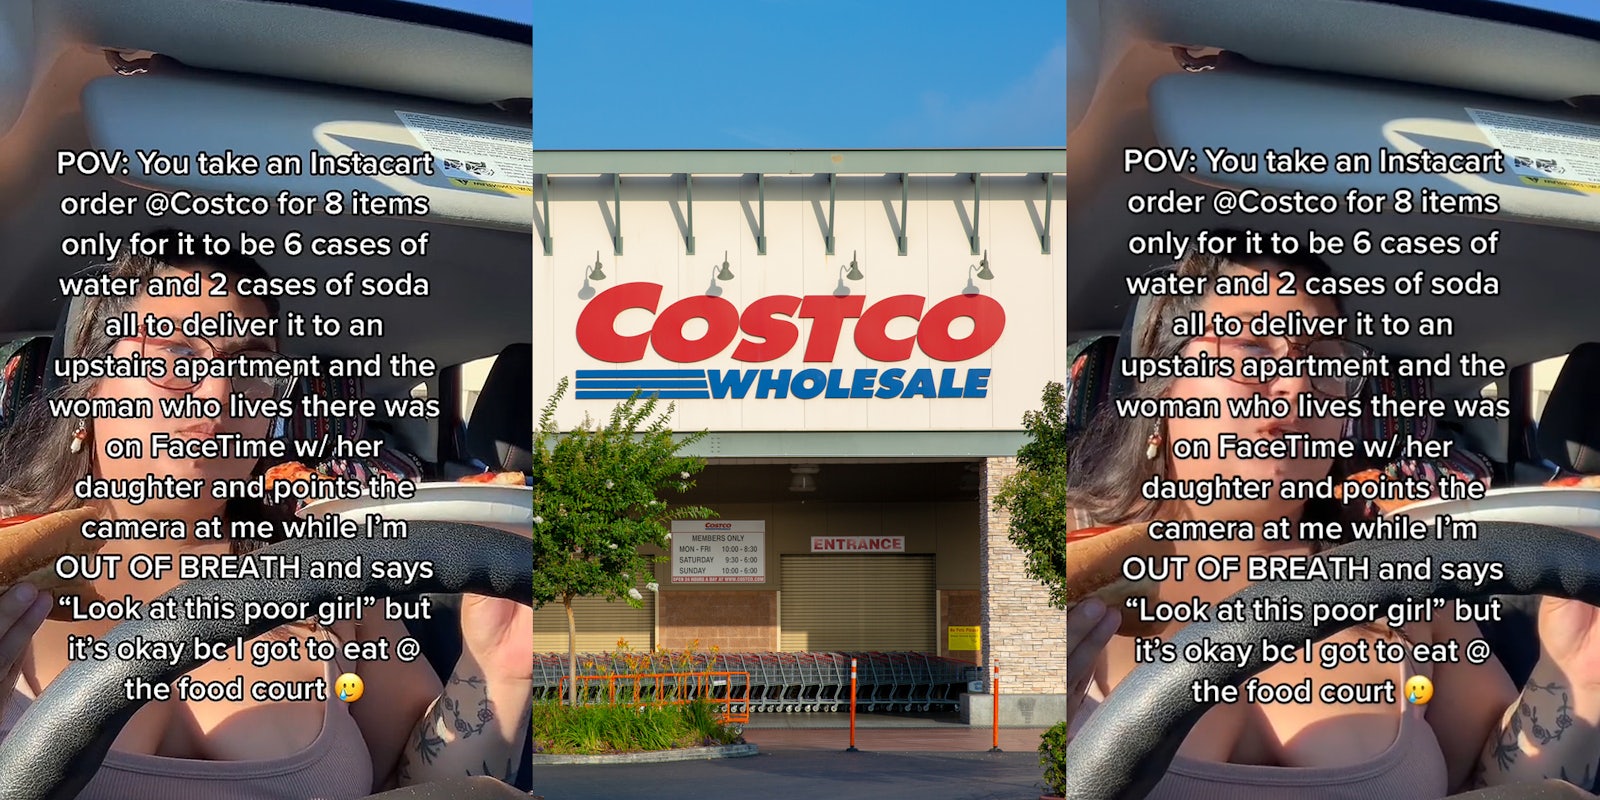 woman eating pizza in car caption 'POV: You take an Instacart order @Costco for 8 items only for it to be 6 cases of water and 2 cases of soda all to deliver it to an upstairs apartment and the woman who lives there was on Facetime w/ her daughter and points the camera at me while I'm OUT OF BREATH and says 'Look at this poor girl' but it's okay bc I got to eat @ the food court' (l) Costco building with sign (c) woman eating pizza in car caption 'POV: You take an Instacart order @Costco for 8 items only for it to be 6 cases of water and 2 cases of soda all to deliver it to an upstairs apartment and the woman who lives there was on Facetime w/ her daughter and points the camera at me while I'm OUT OF BREATH and says 'Look at this poor girl' but it's okay bc I got to eat @ the food court' (r)